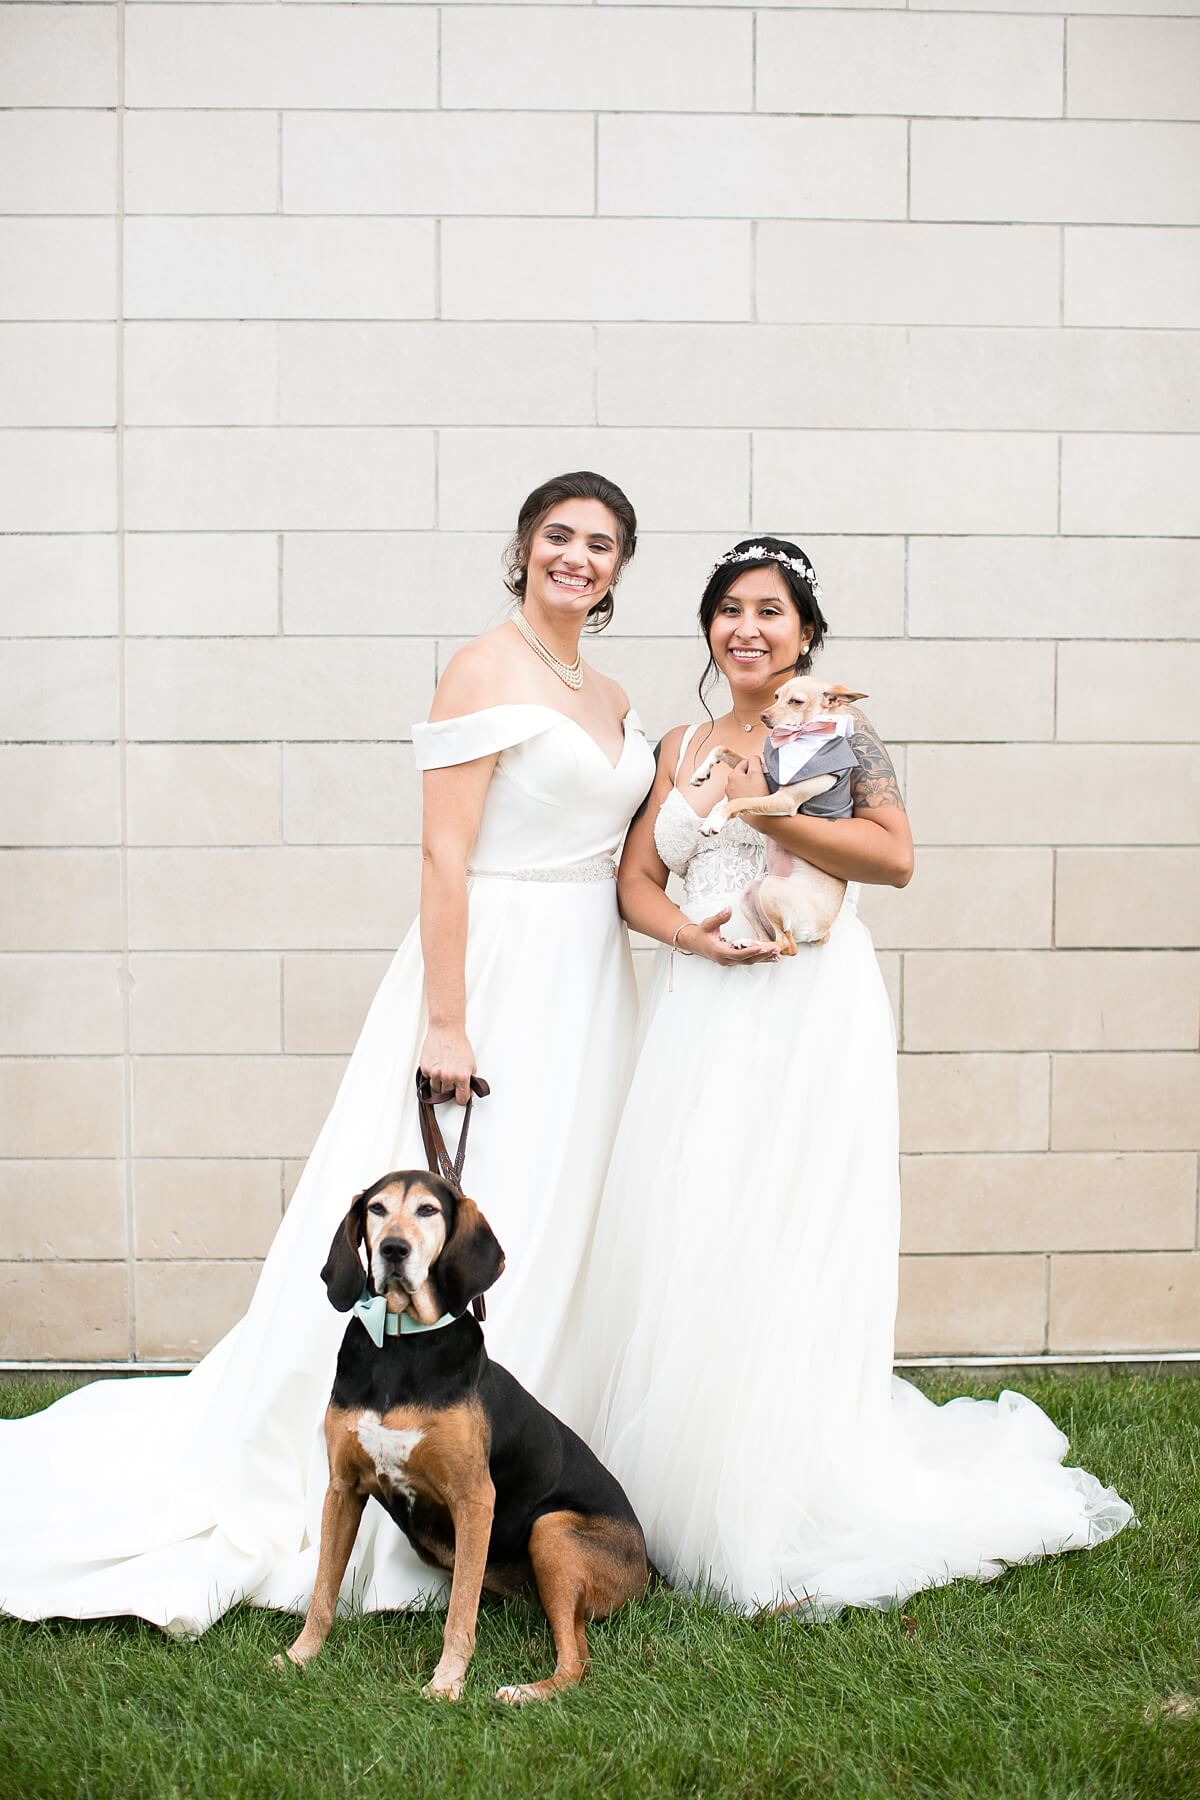 Brides with dogs on wedding day